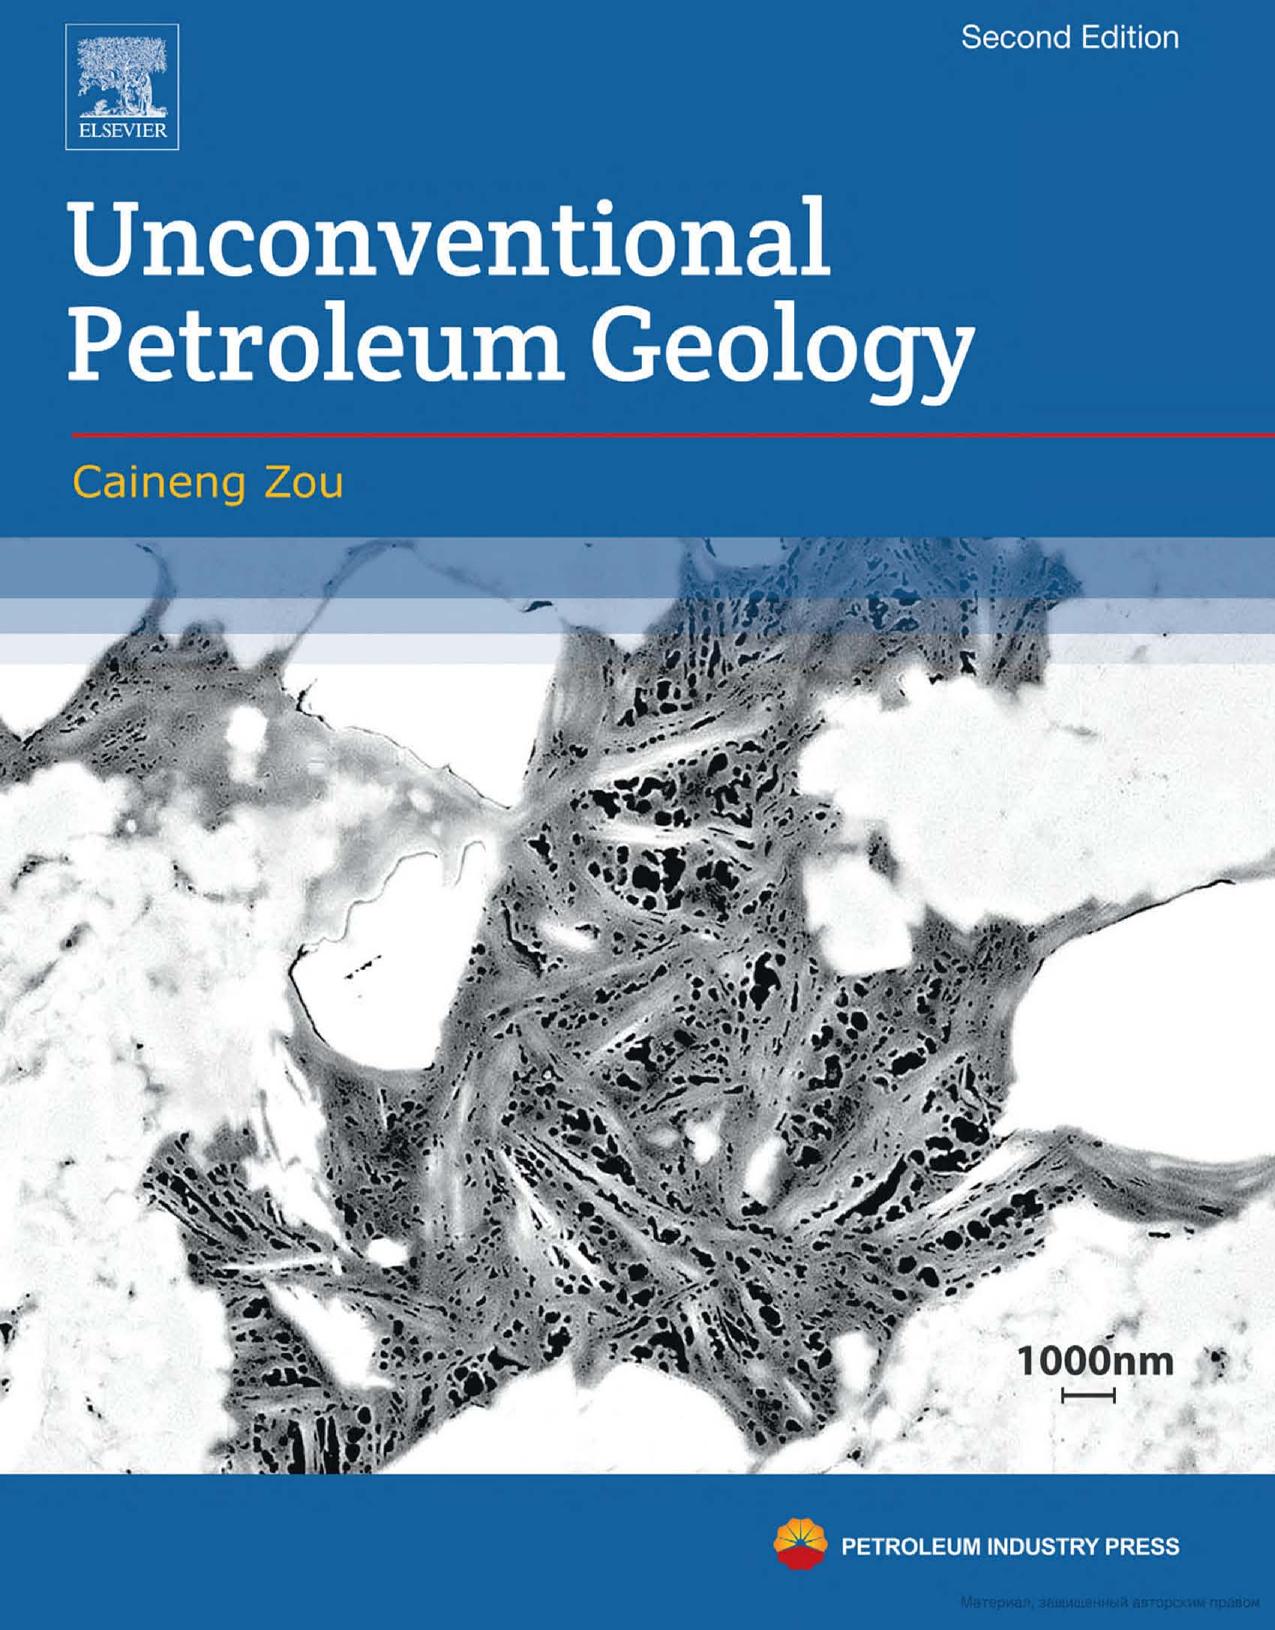 Unconventional Petroleum Geology 2nd Ed.